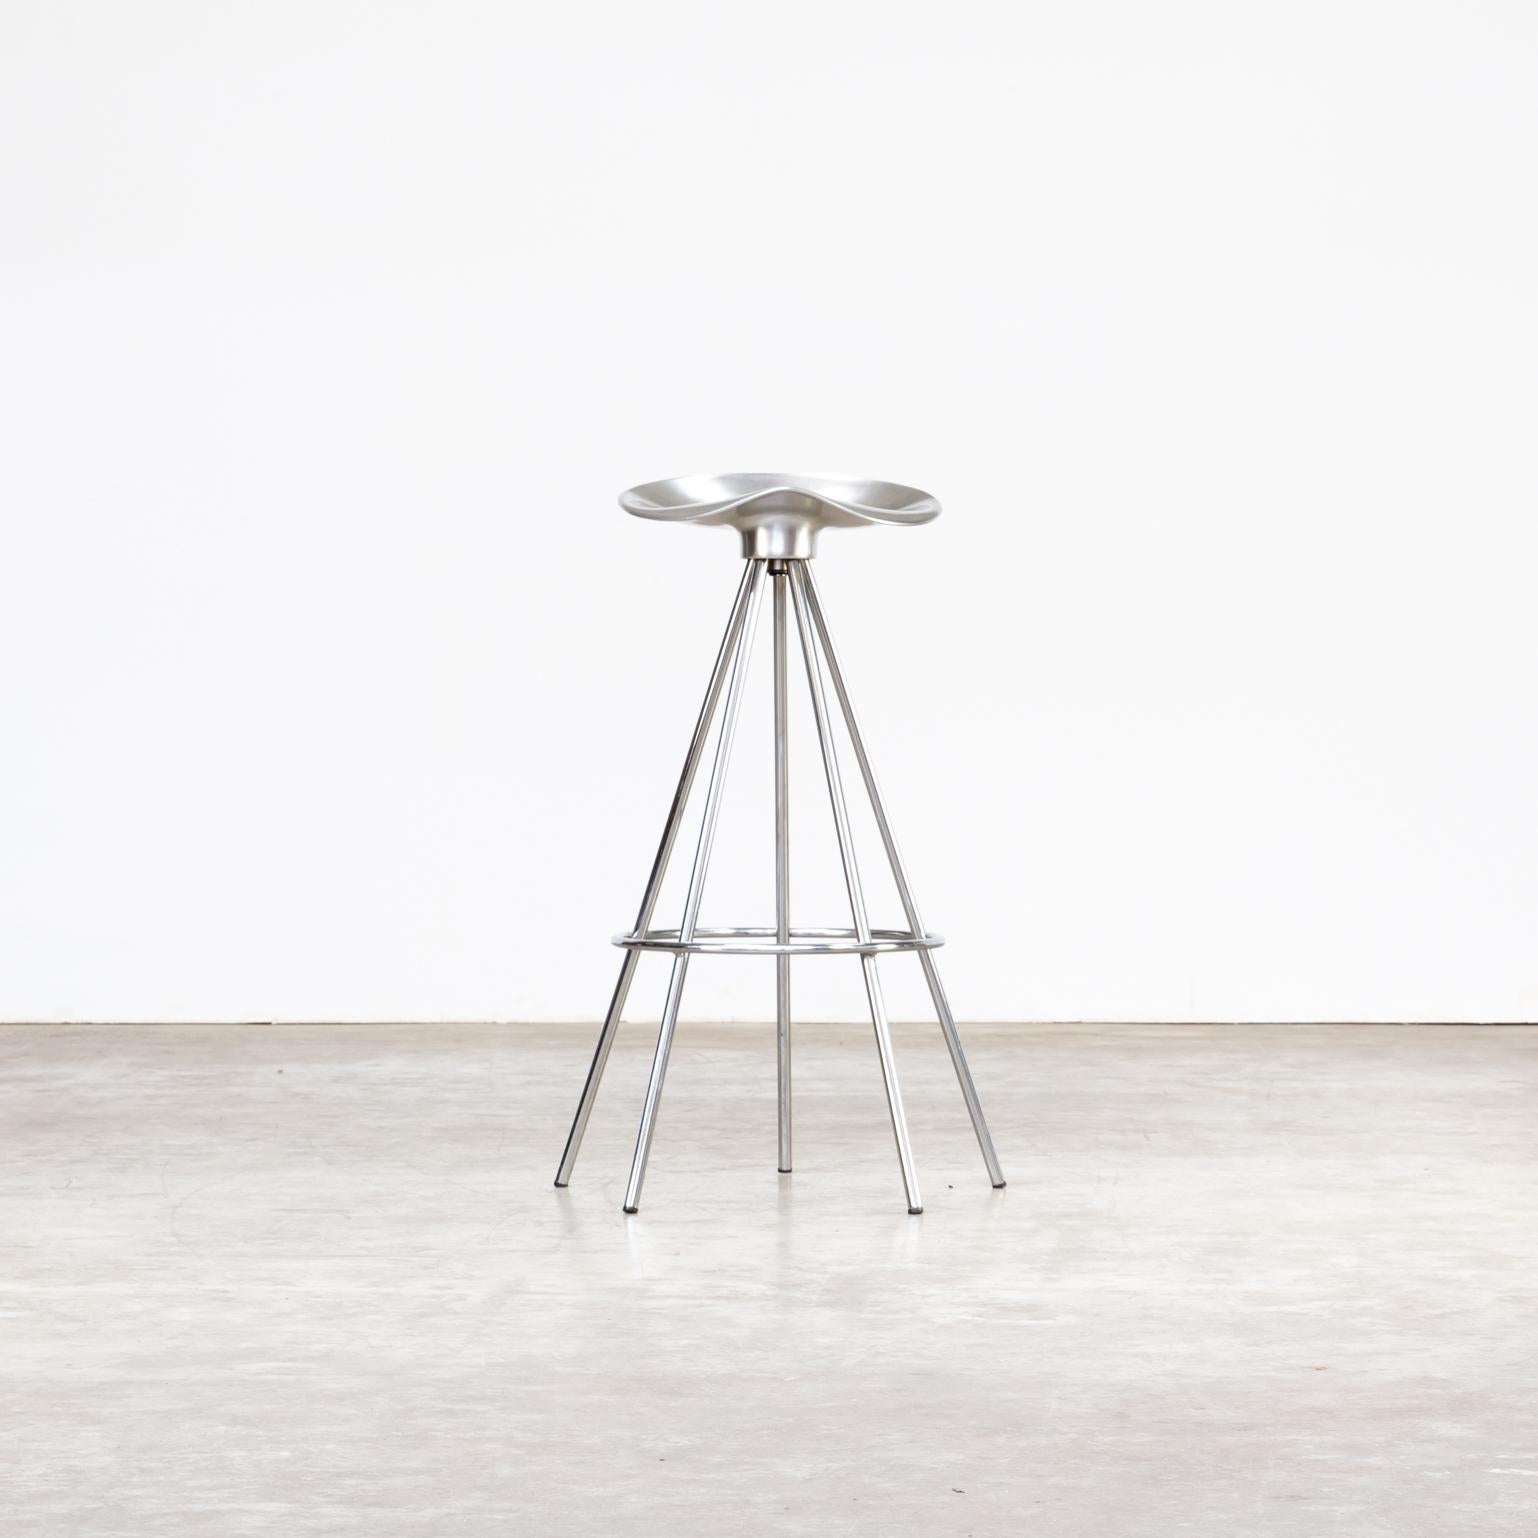 1990s Pepe Cortes ‘jamaica’ aluminium stool for Amat 3. Good condition consistent with age and use.